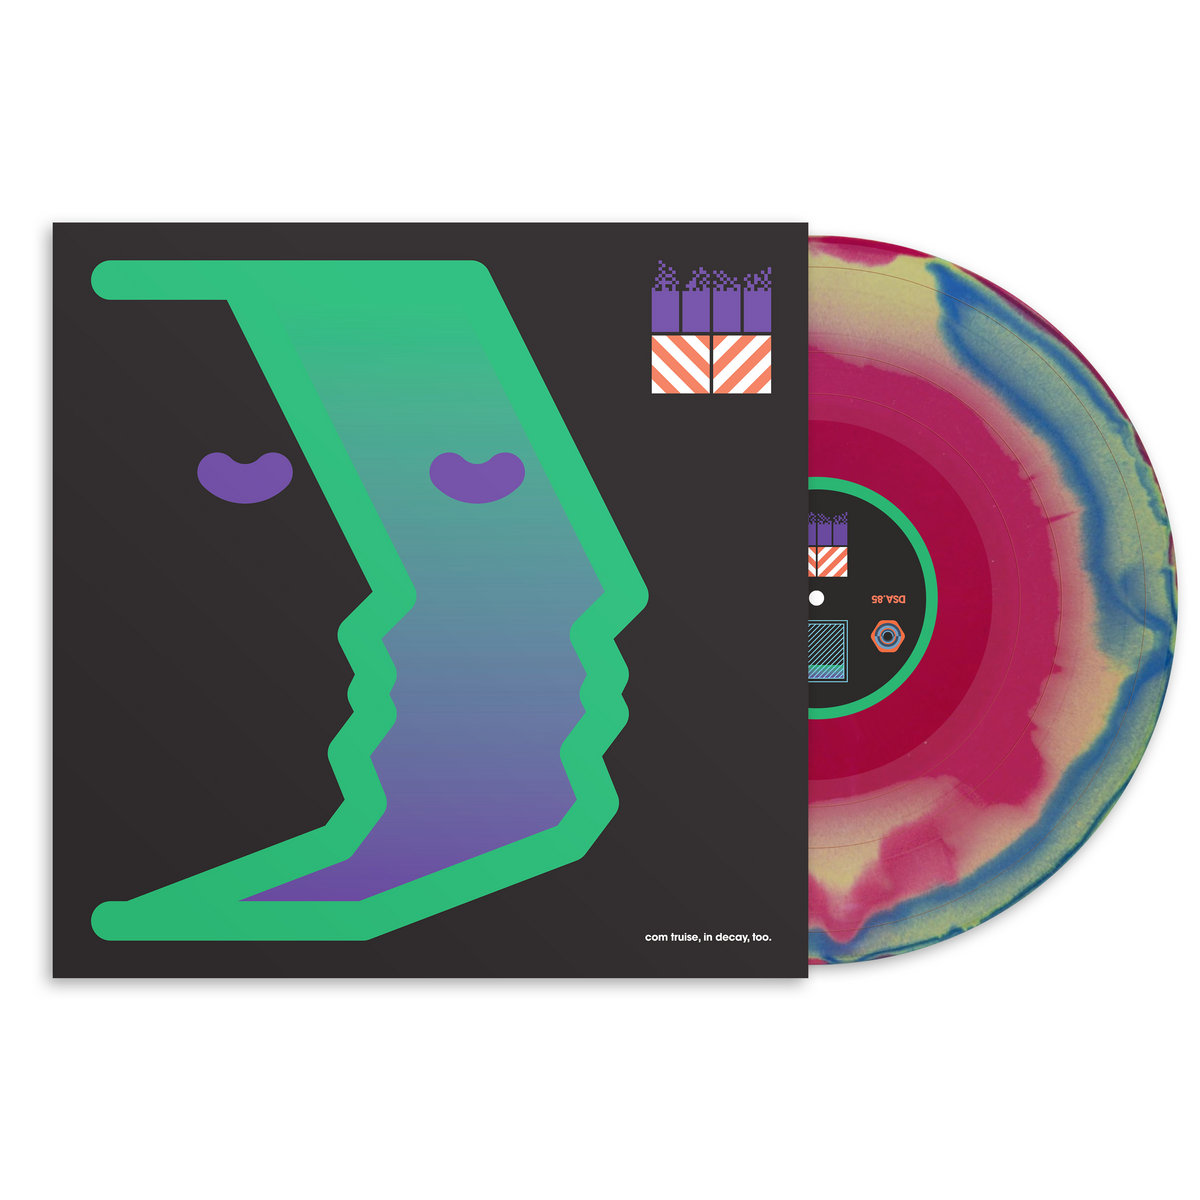 Com Truise "In decay, too" LP